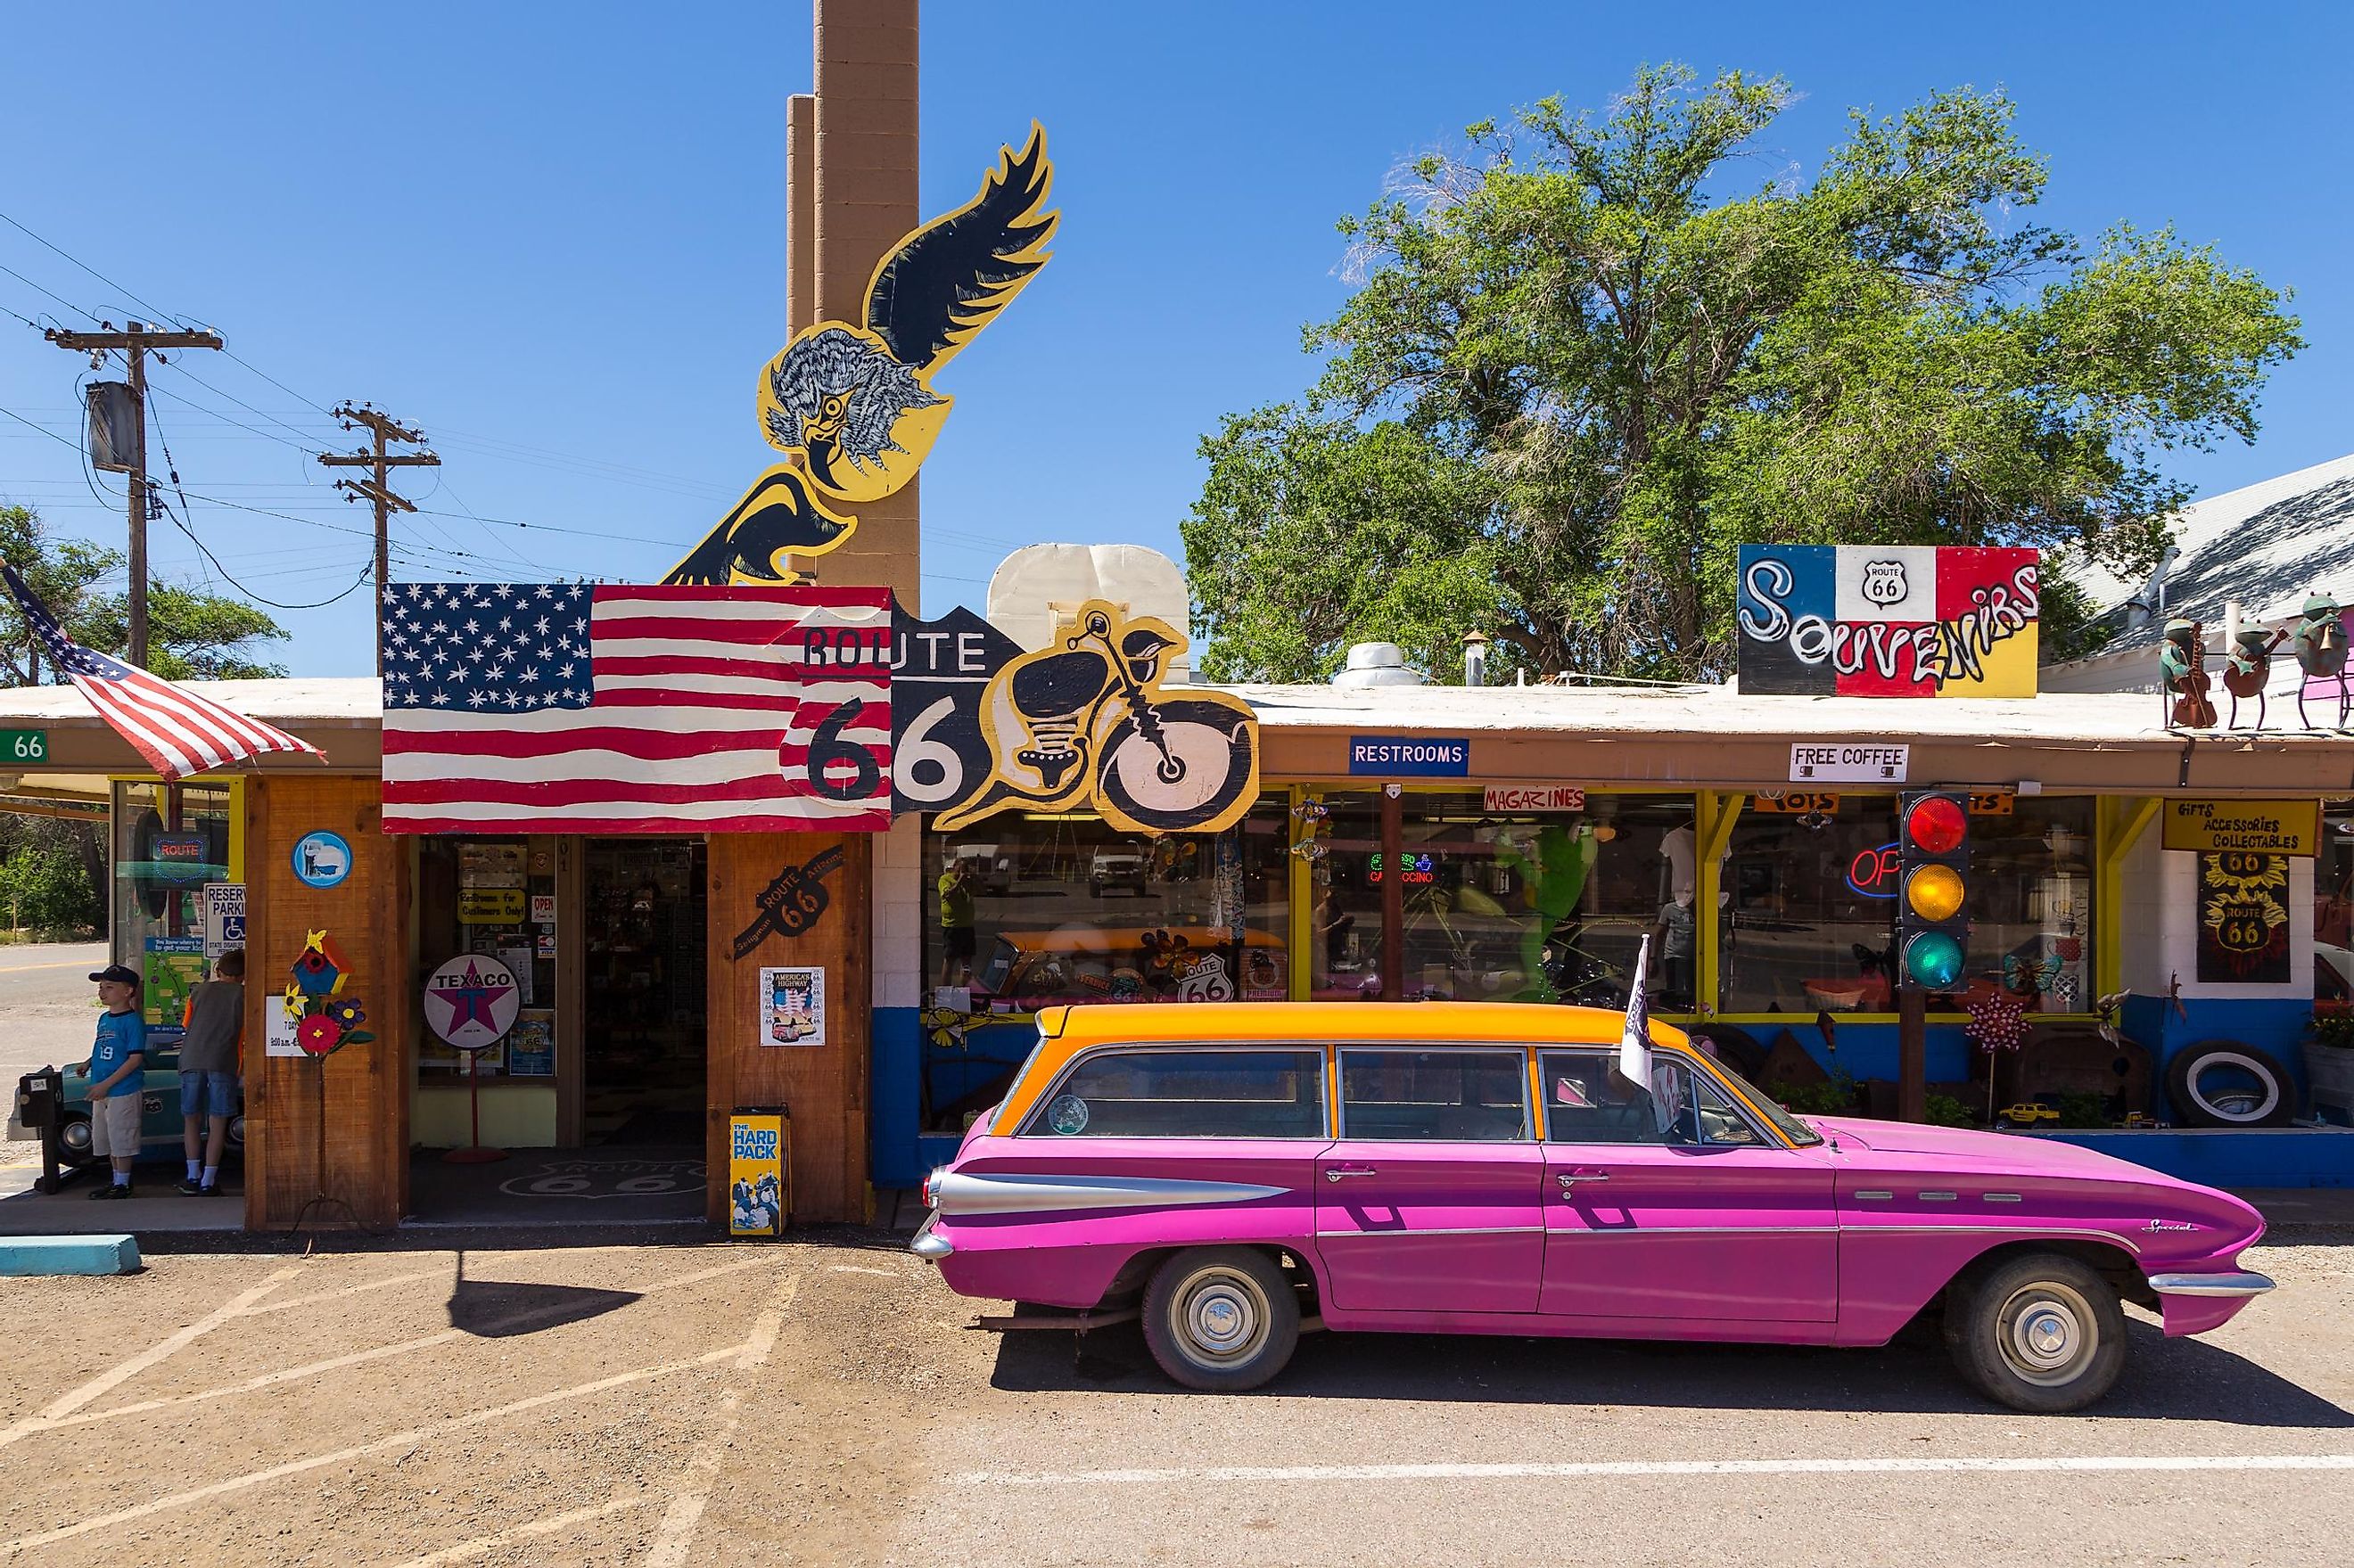 Seligman, Arizona: Old, antique car parked on the legendary Route 66